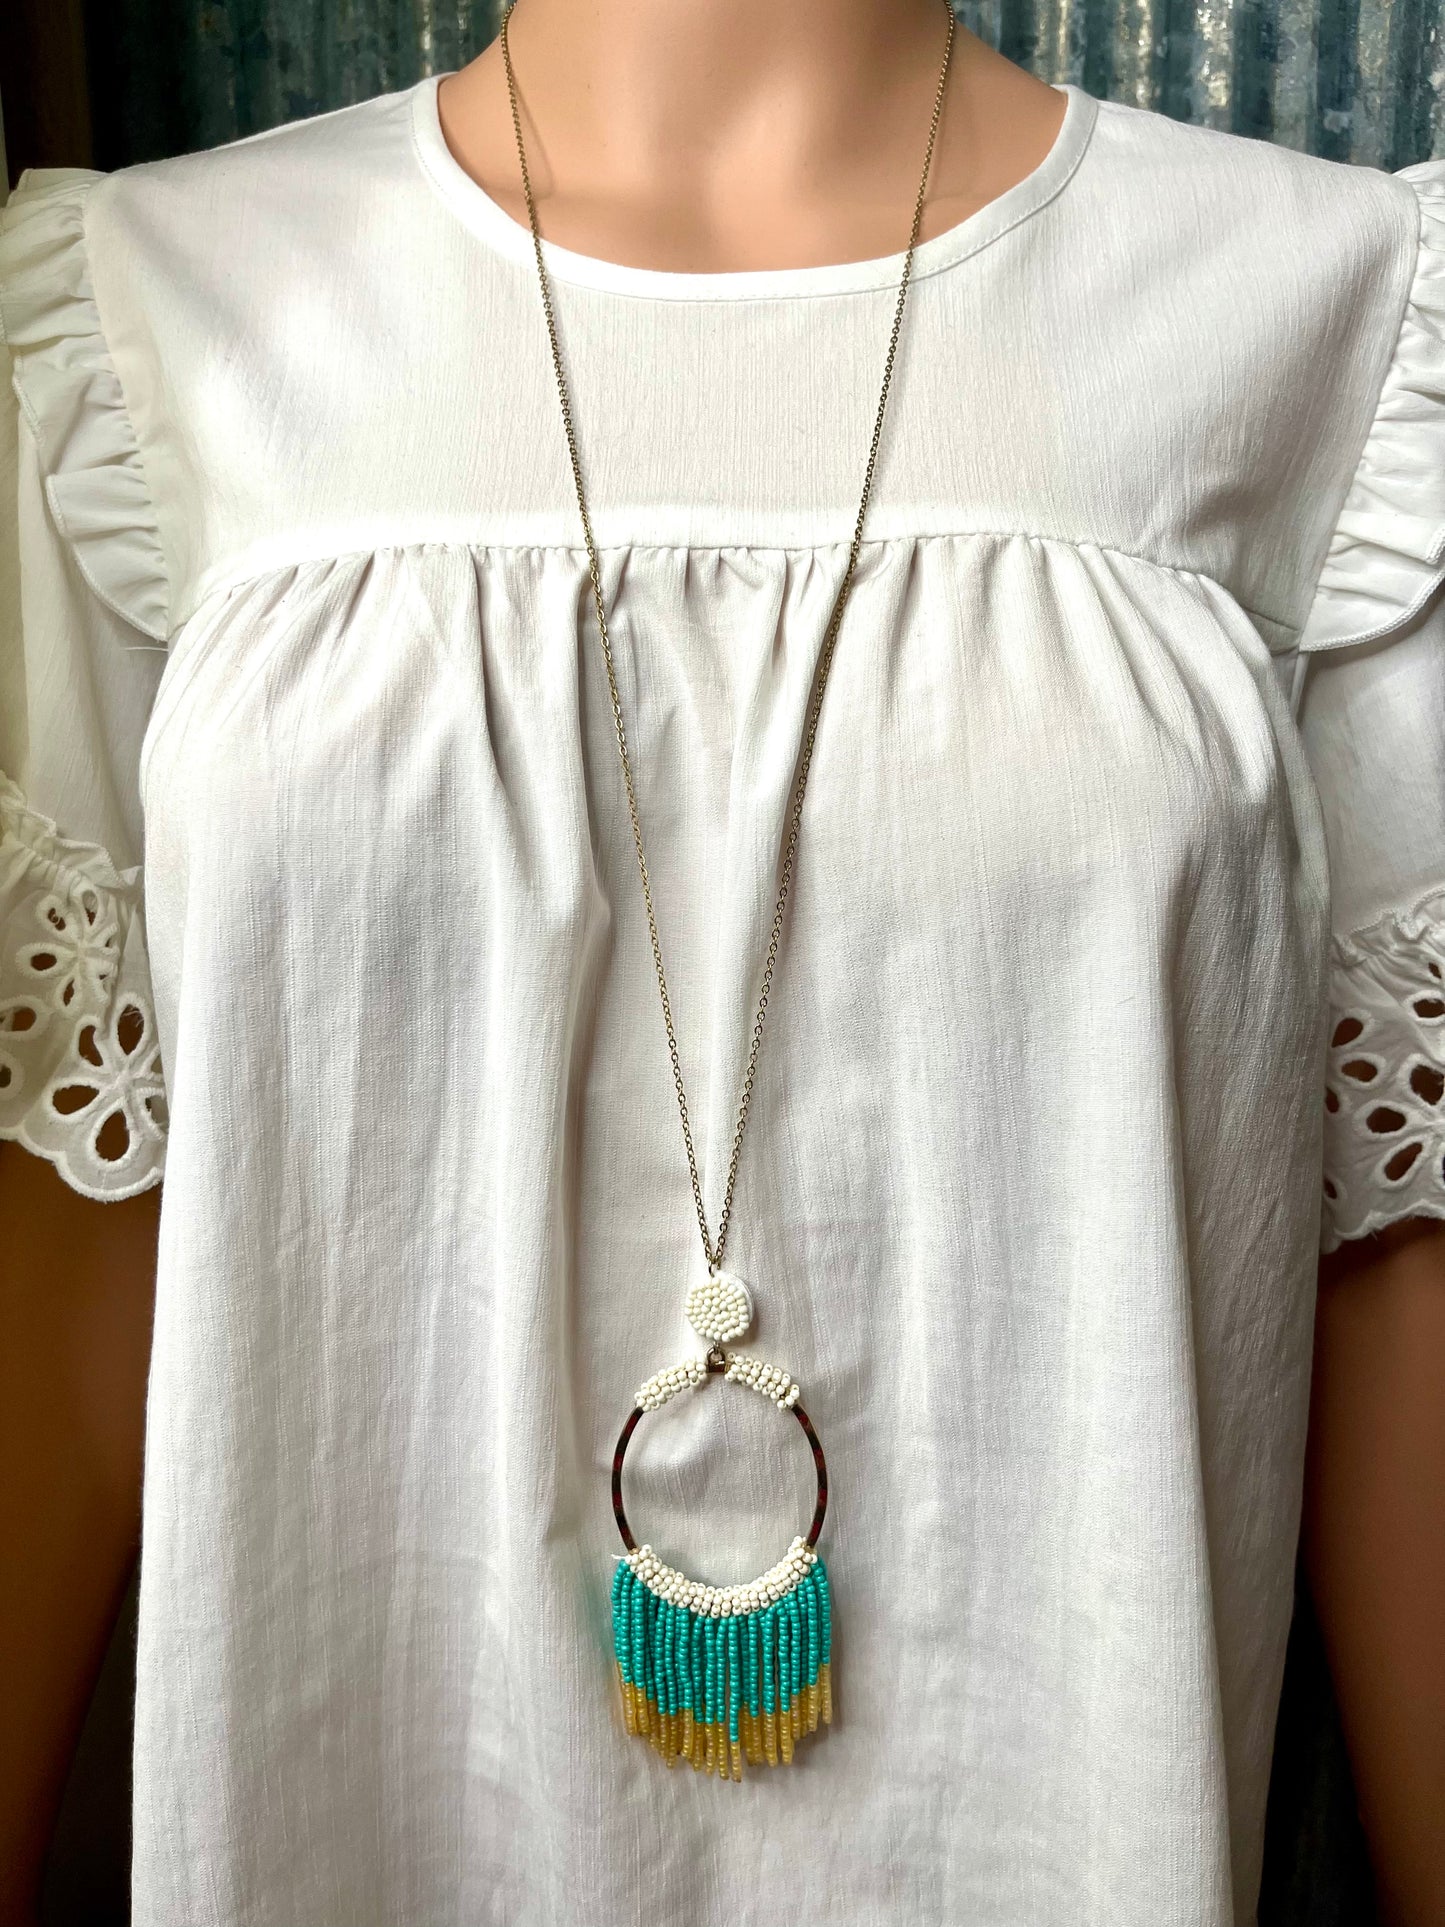 White Beaded Necklace with Teal & Gold Fringe